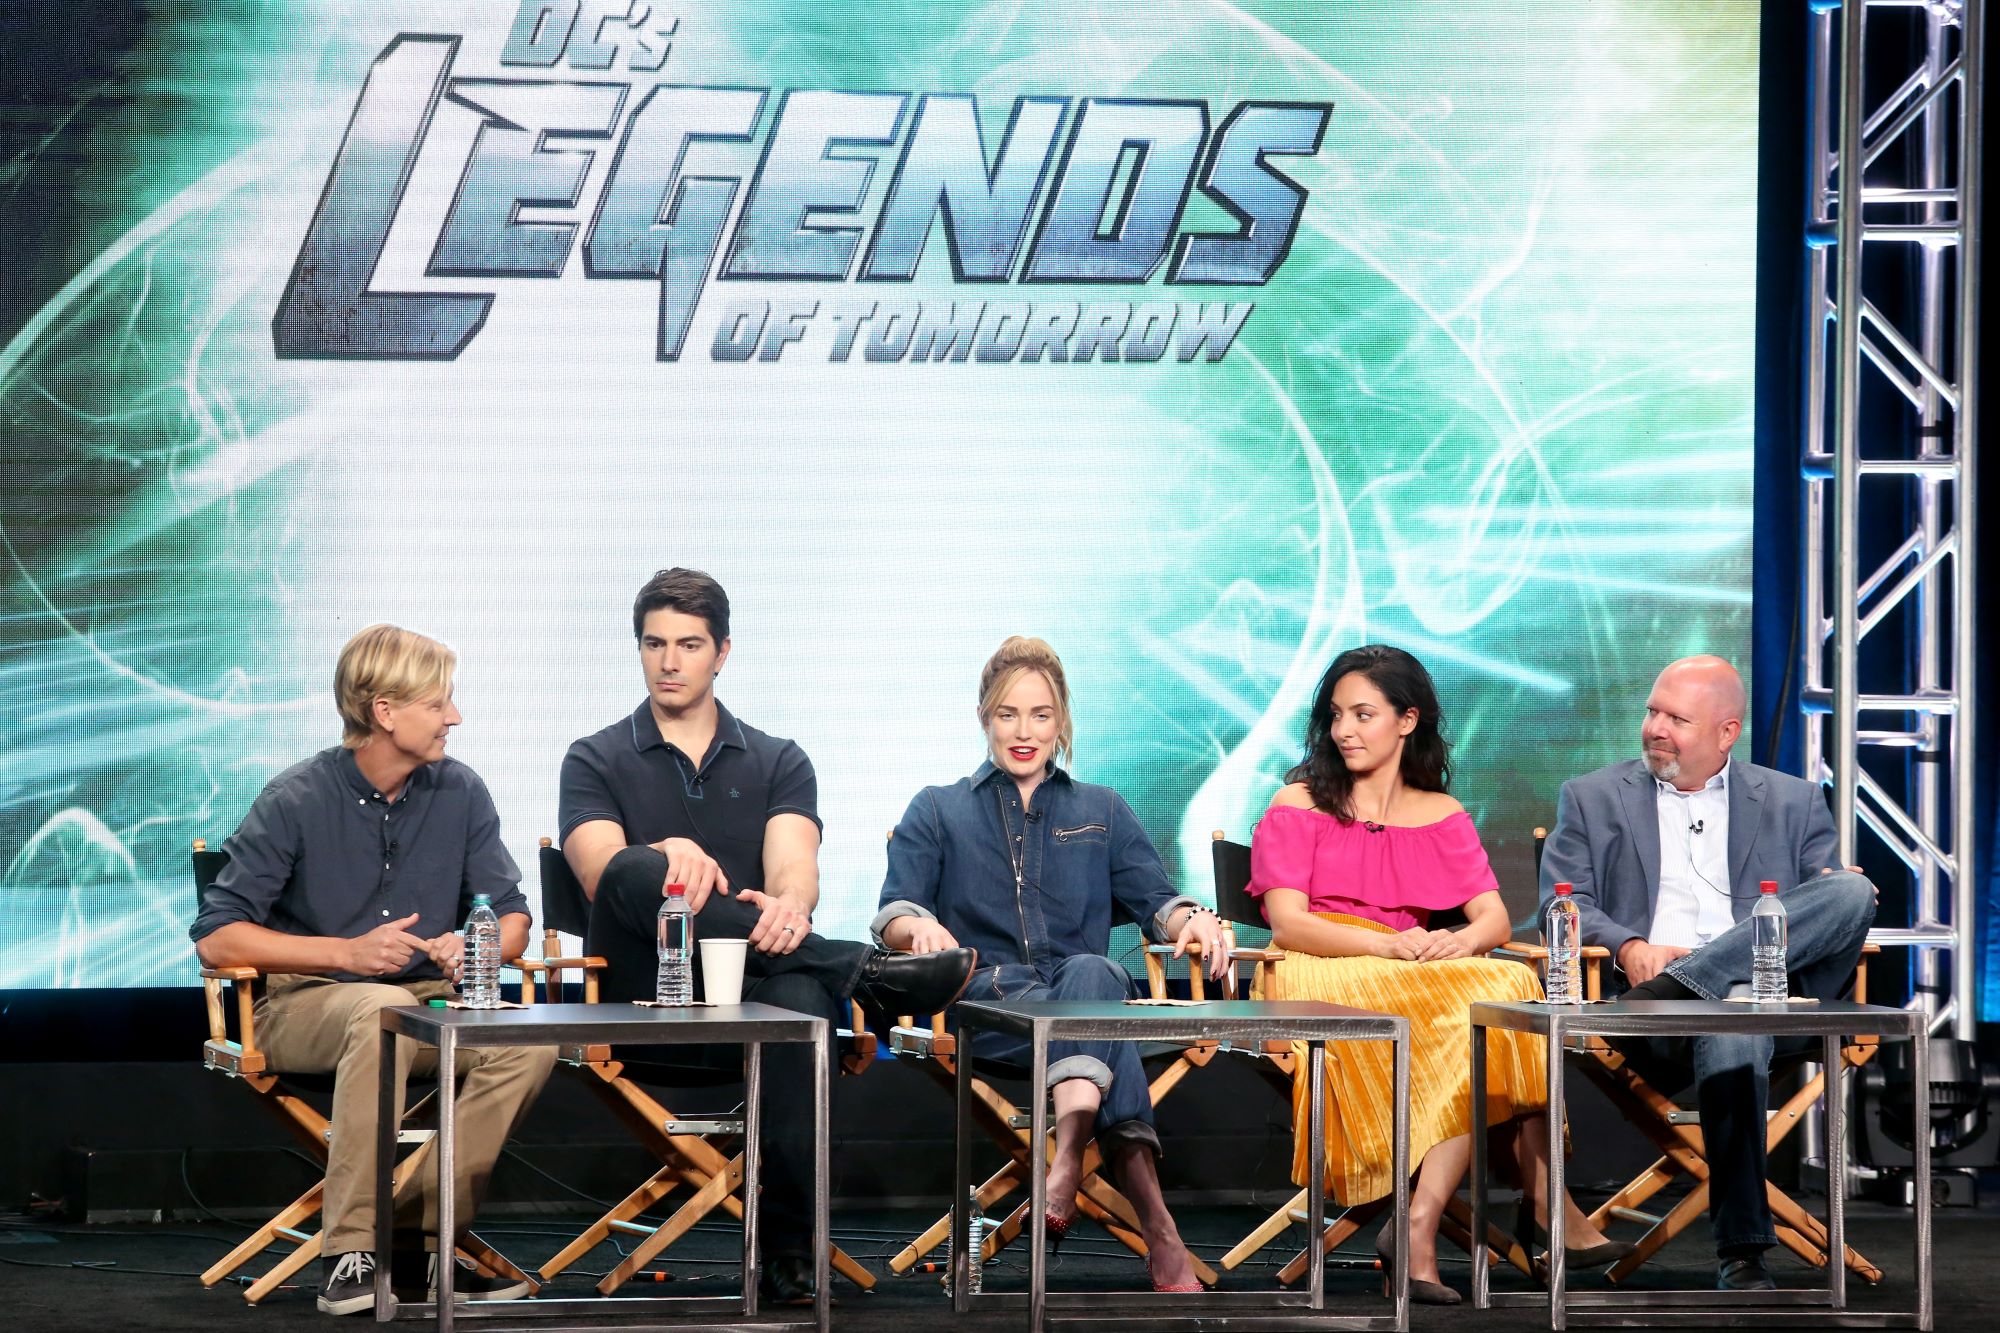 Phil Klemmer, Brandon Routh, Caity Lotz, Tala Ashe, and Marc Guggenheim of 'DC's Legends of Tomorrow' speak onstage about the show. They sit in director's chairs with the 'DC's Legends of Tomorrow' title card on the screen behind them. 'DC's Legends of Tomorrow' Season 7 Episode 1 premieres on Oct. 13.